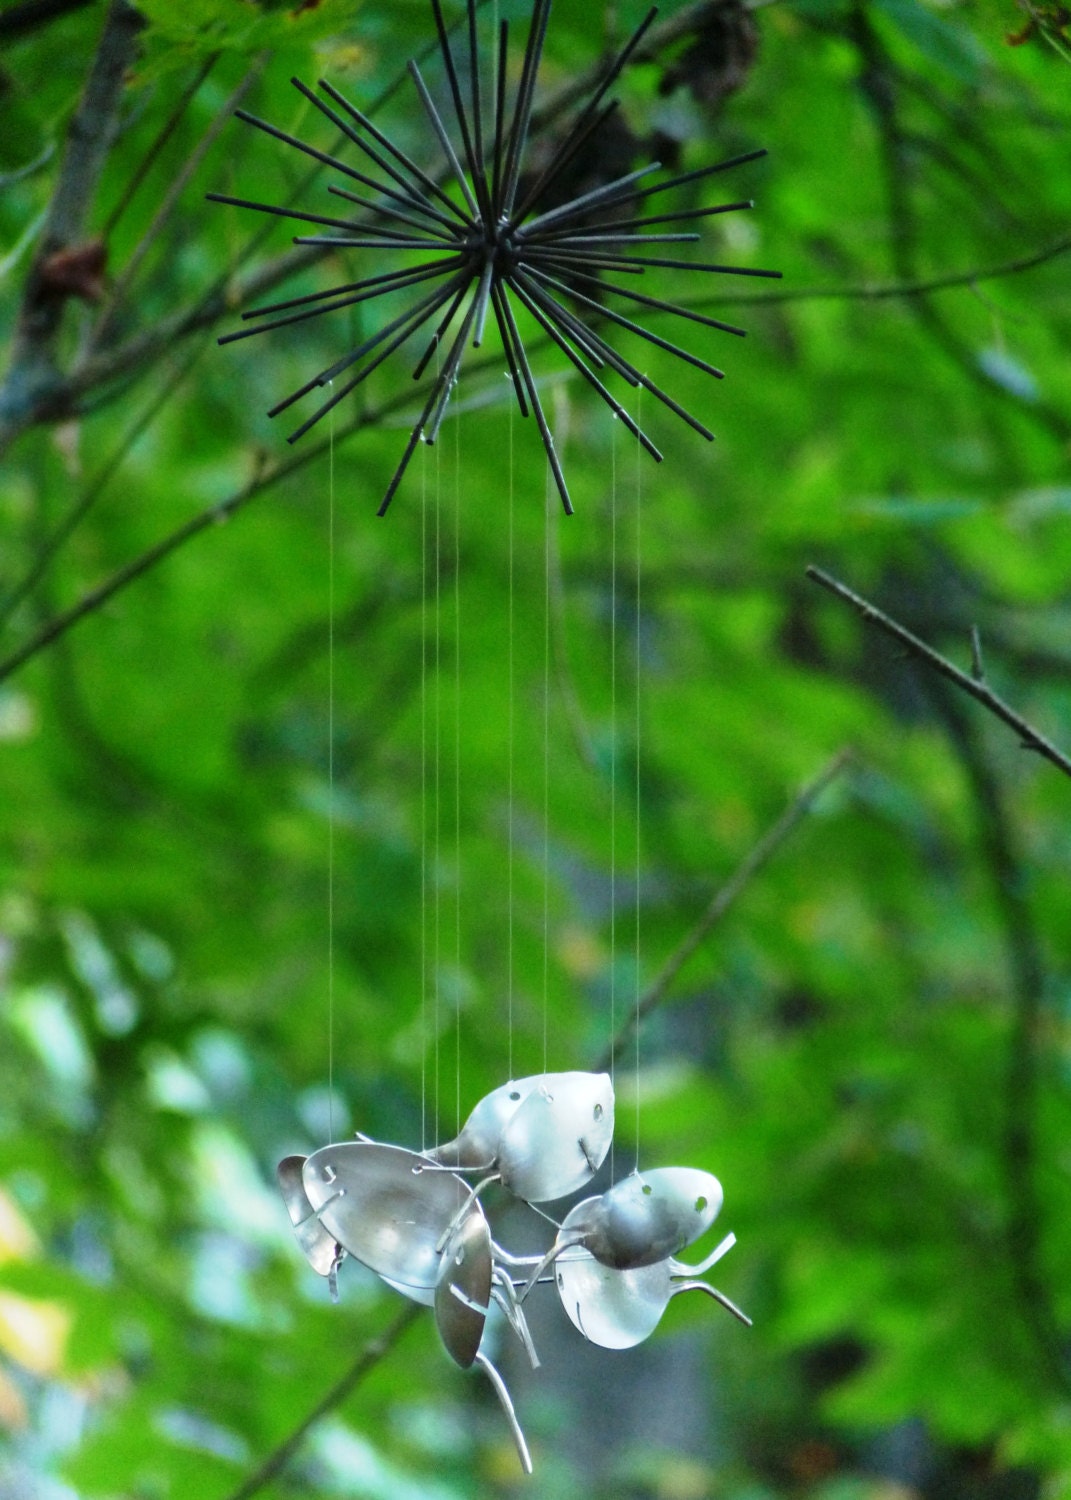 Intricate Spoontail Spoon Fish Windchime-musical Kinetic Metal